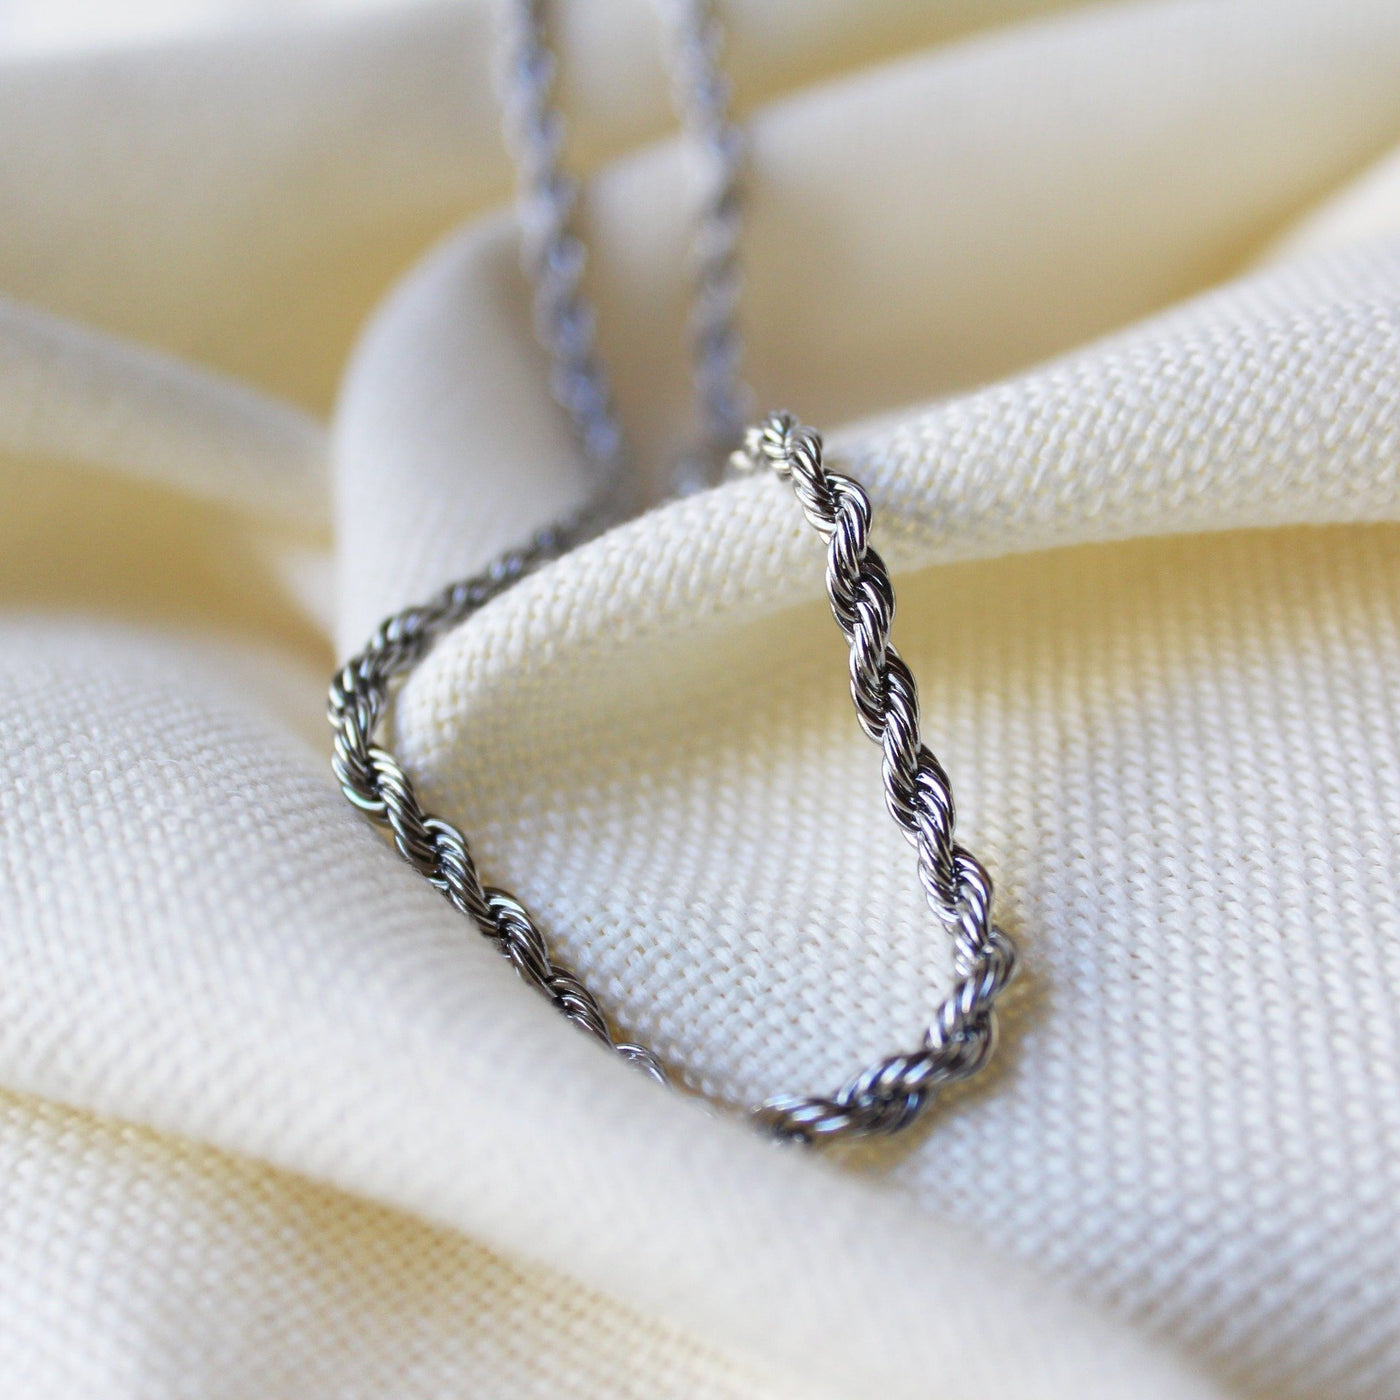 Twisted Rope Chain Necklace - Maral Kunst Jewelry